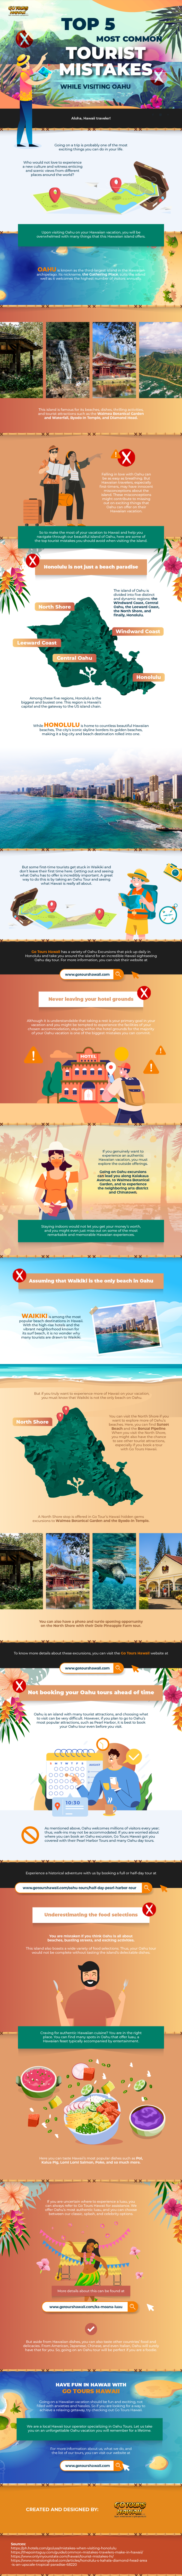 Top-5-Tourist-Mistakes-You-Avoid-When-Visiting-Oahu-infographic-image0HDUA